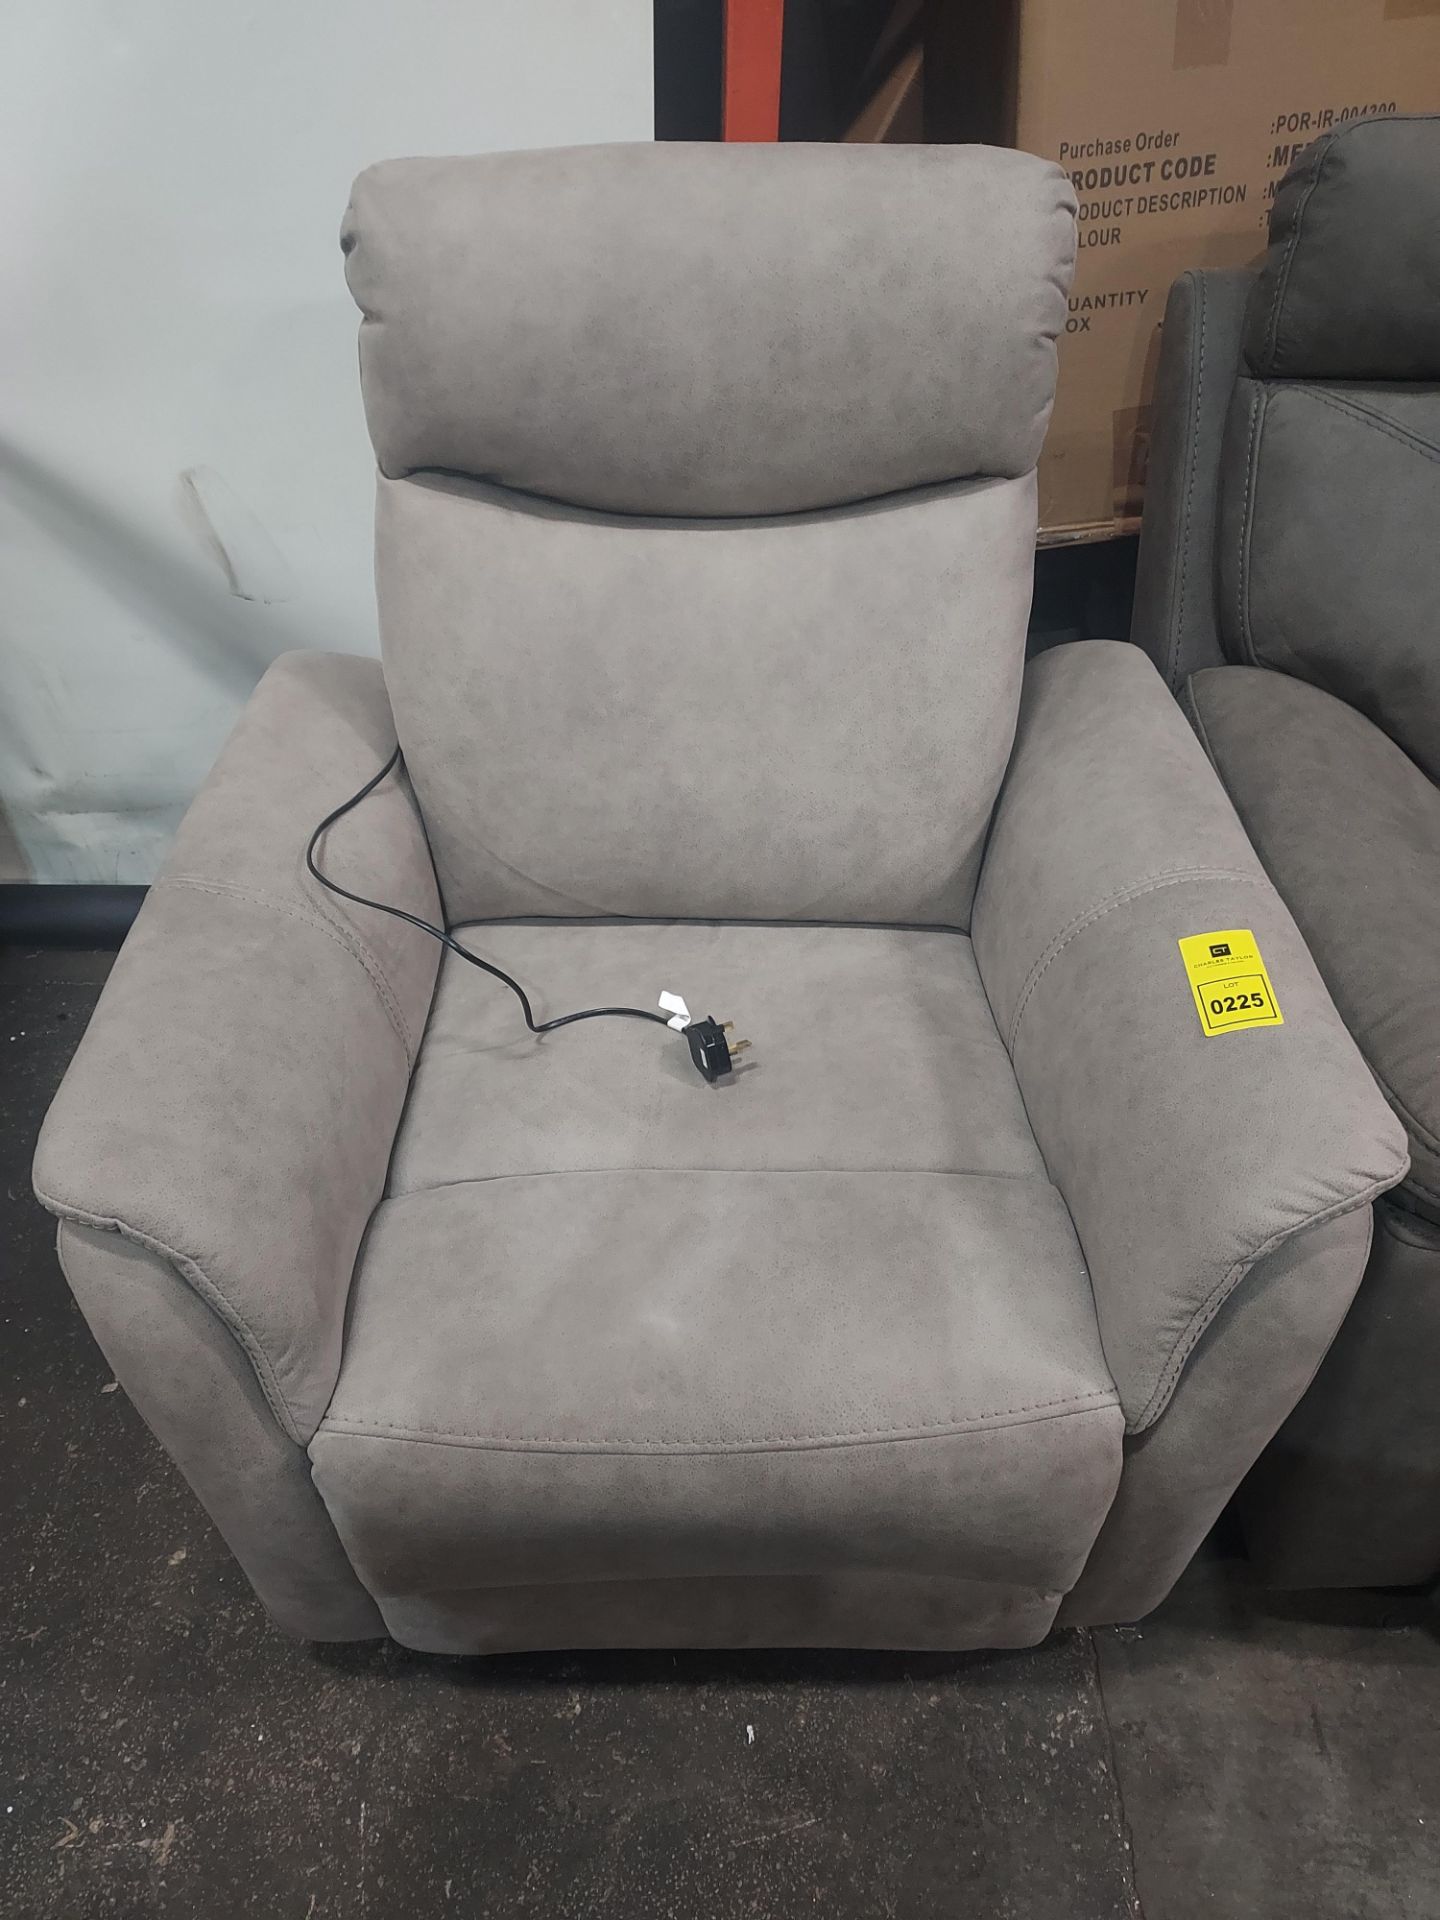 1 X ELECTRIC RECLINER SOFA CHAIR - PLEASE NOTE CUSTOMER RETURNS - SLIGHT STAINS